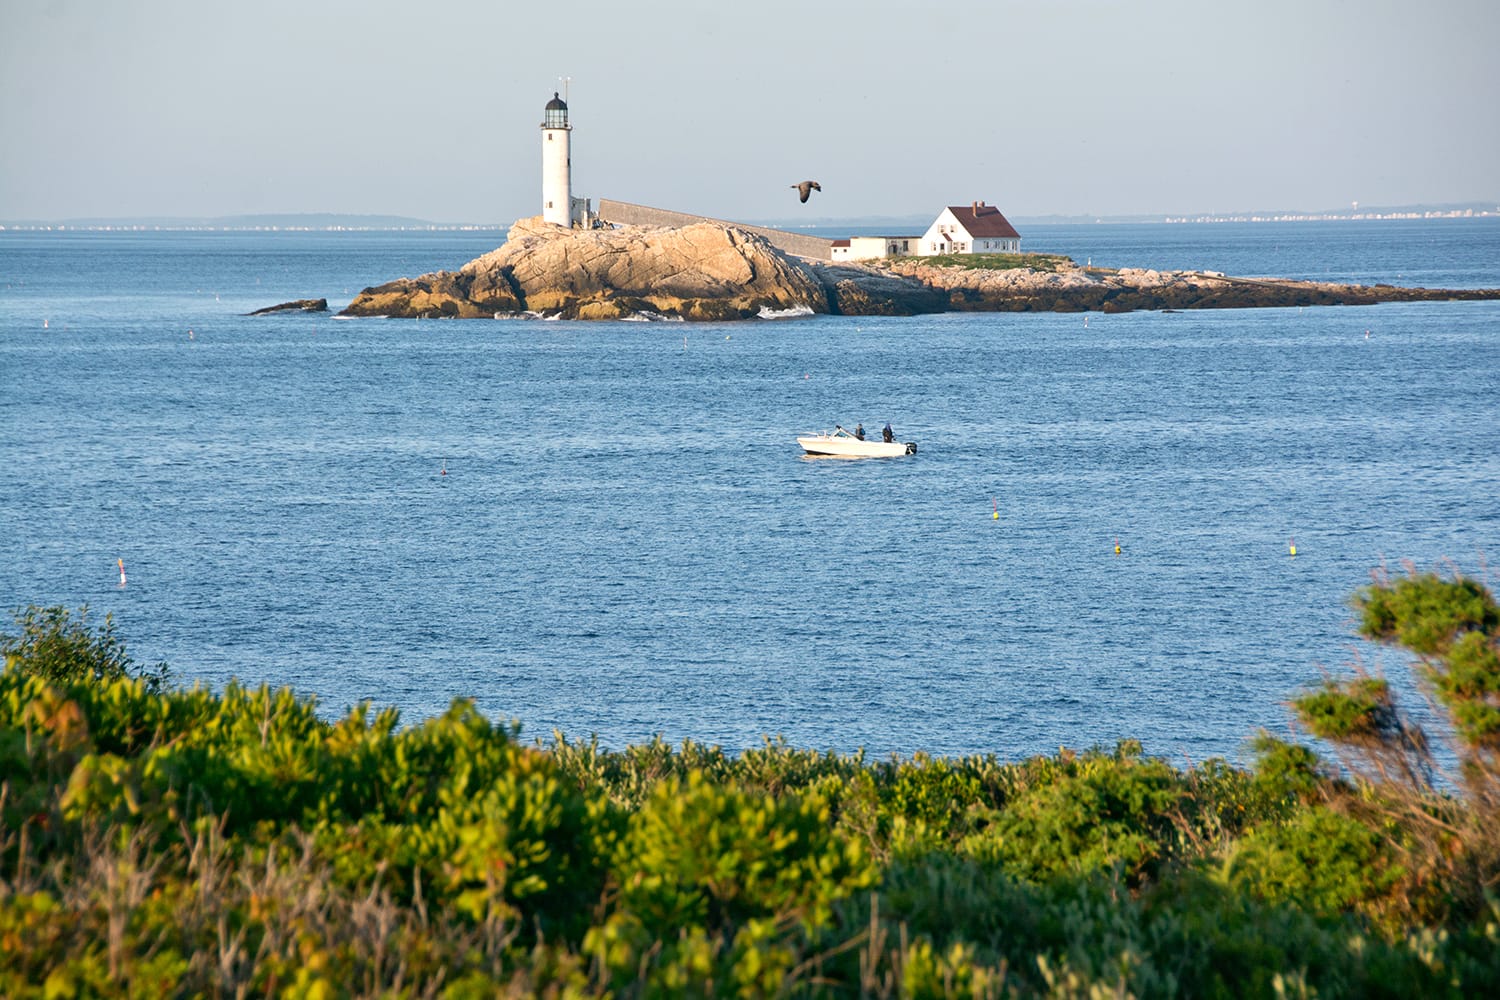 Early morning fishermen try their luck in the strait between Star Island and White Island on a clear summer day. Rye, NH, USA